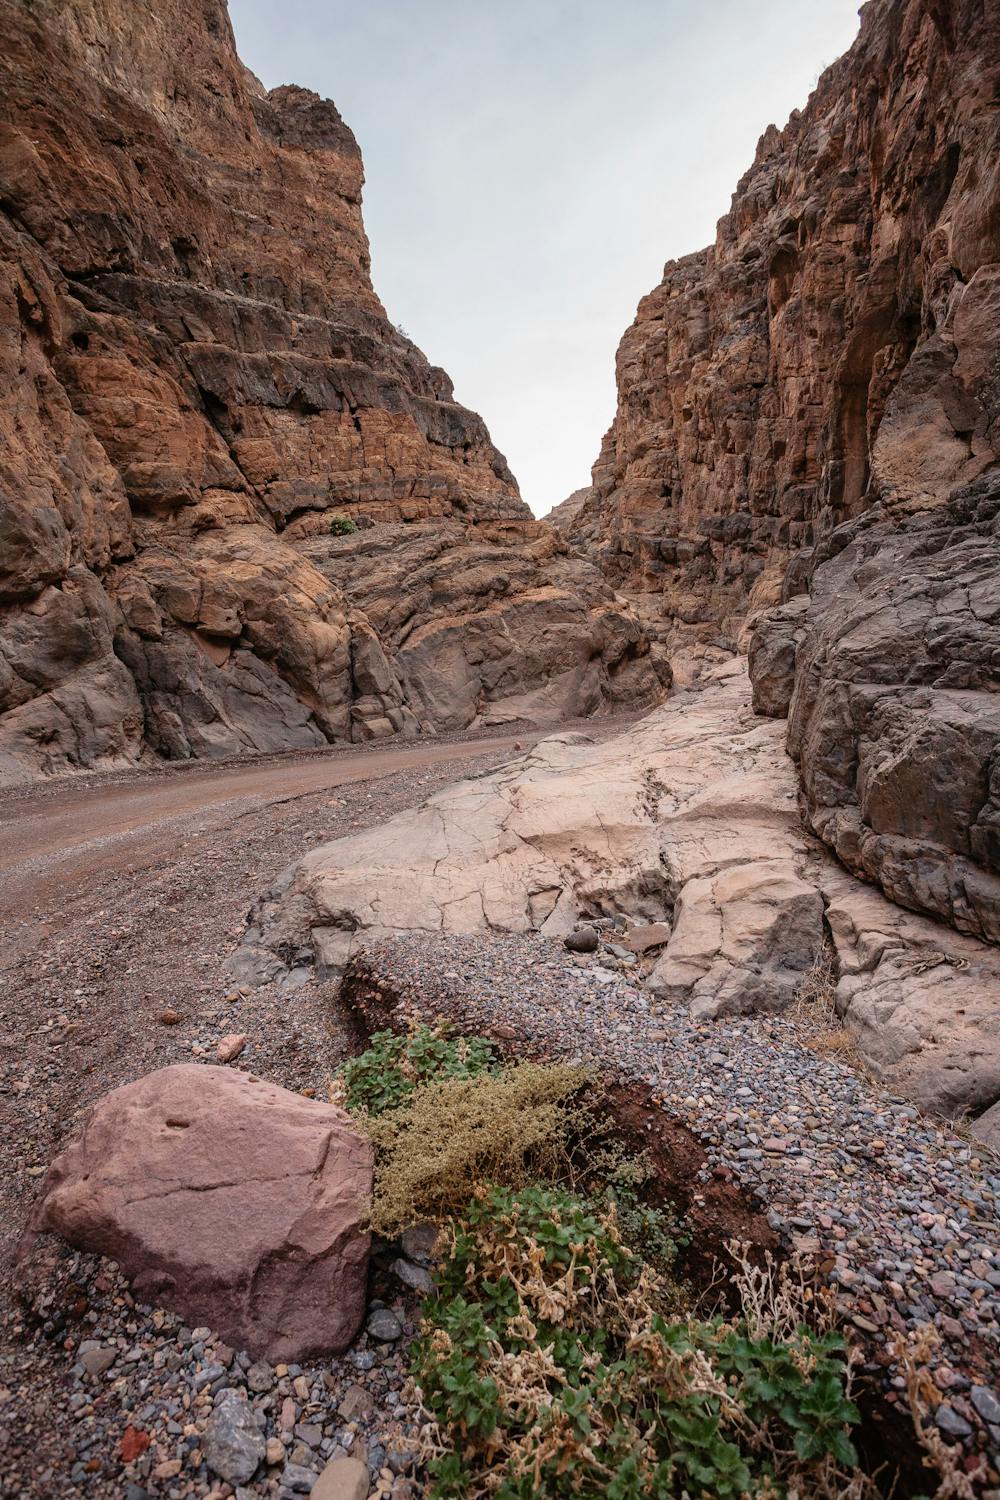 The road through the Narrows.